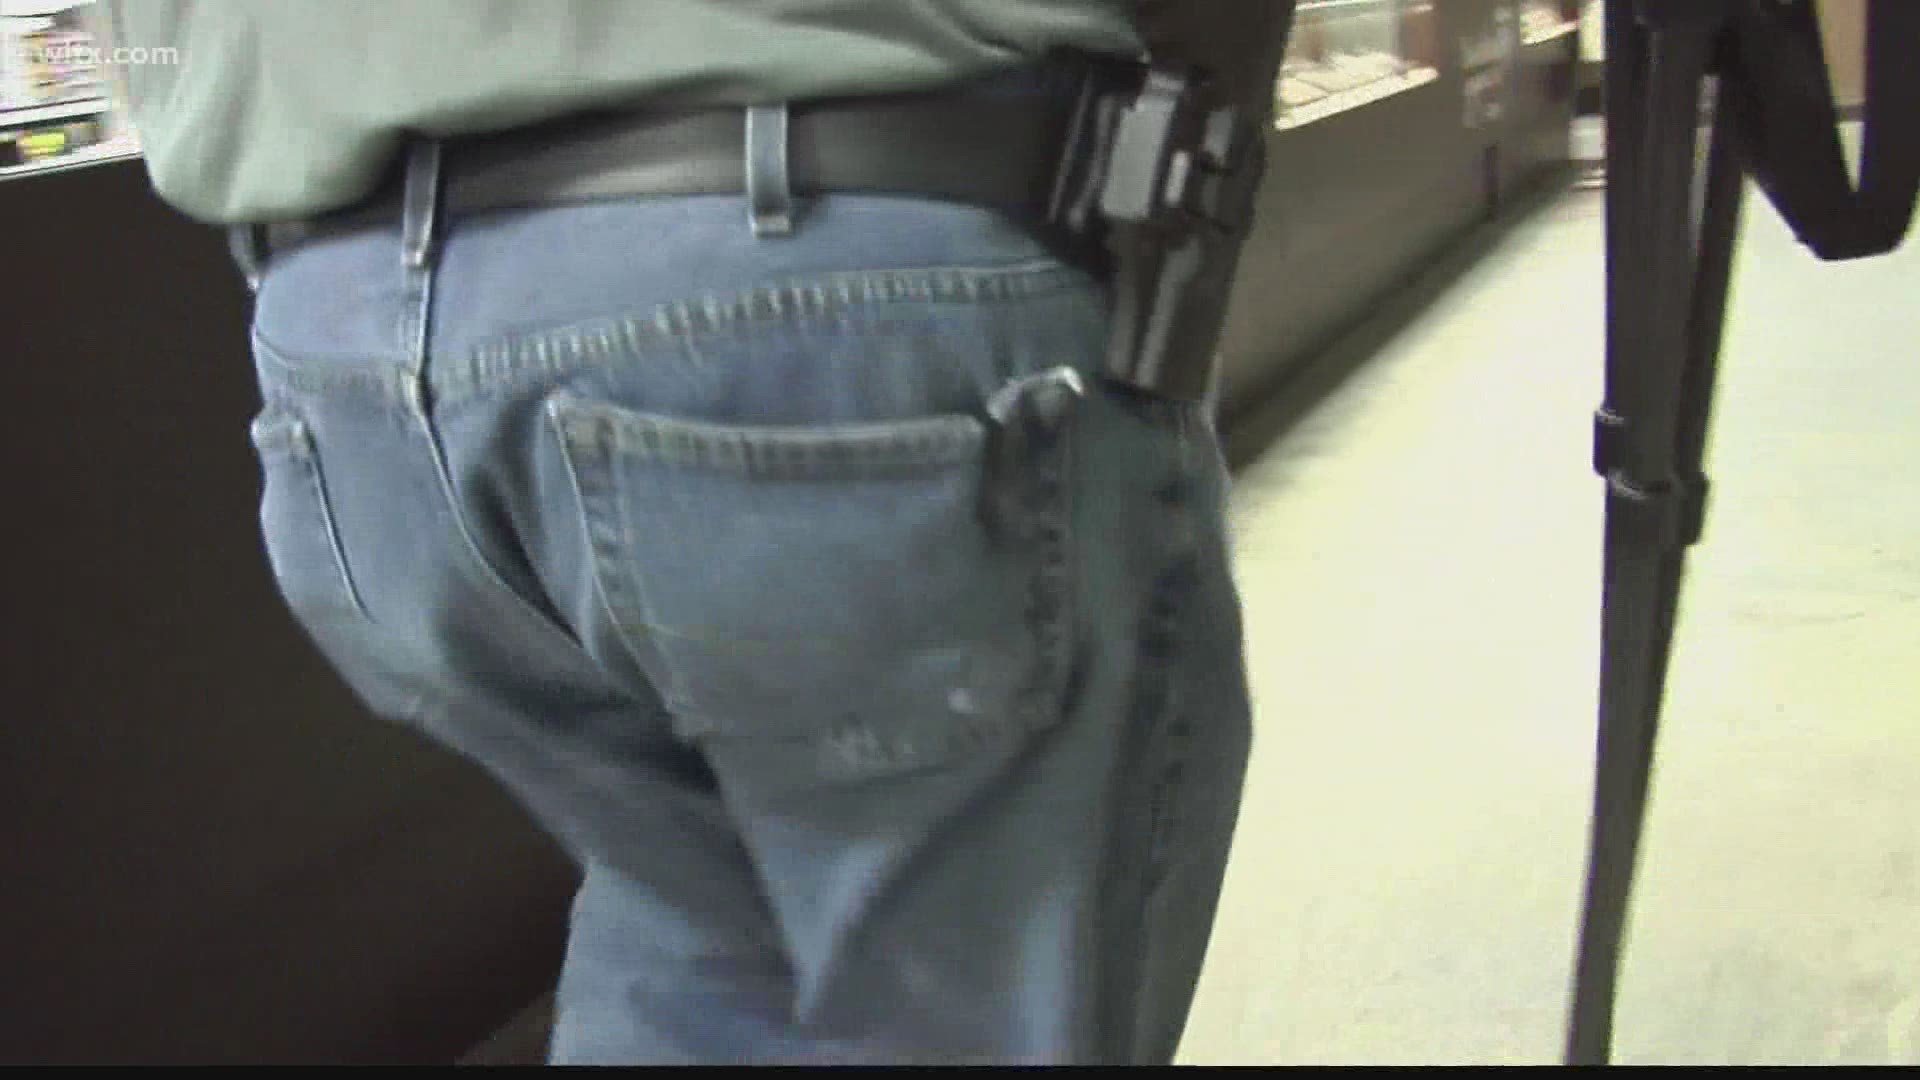 Lawmakers earlier this session passed a bill that allows open carry with a permit.